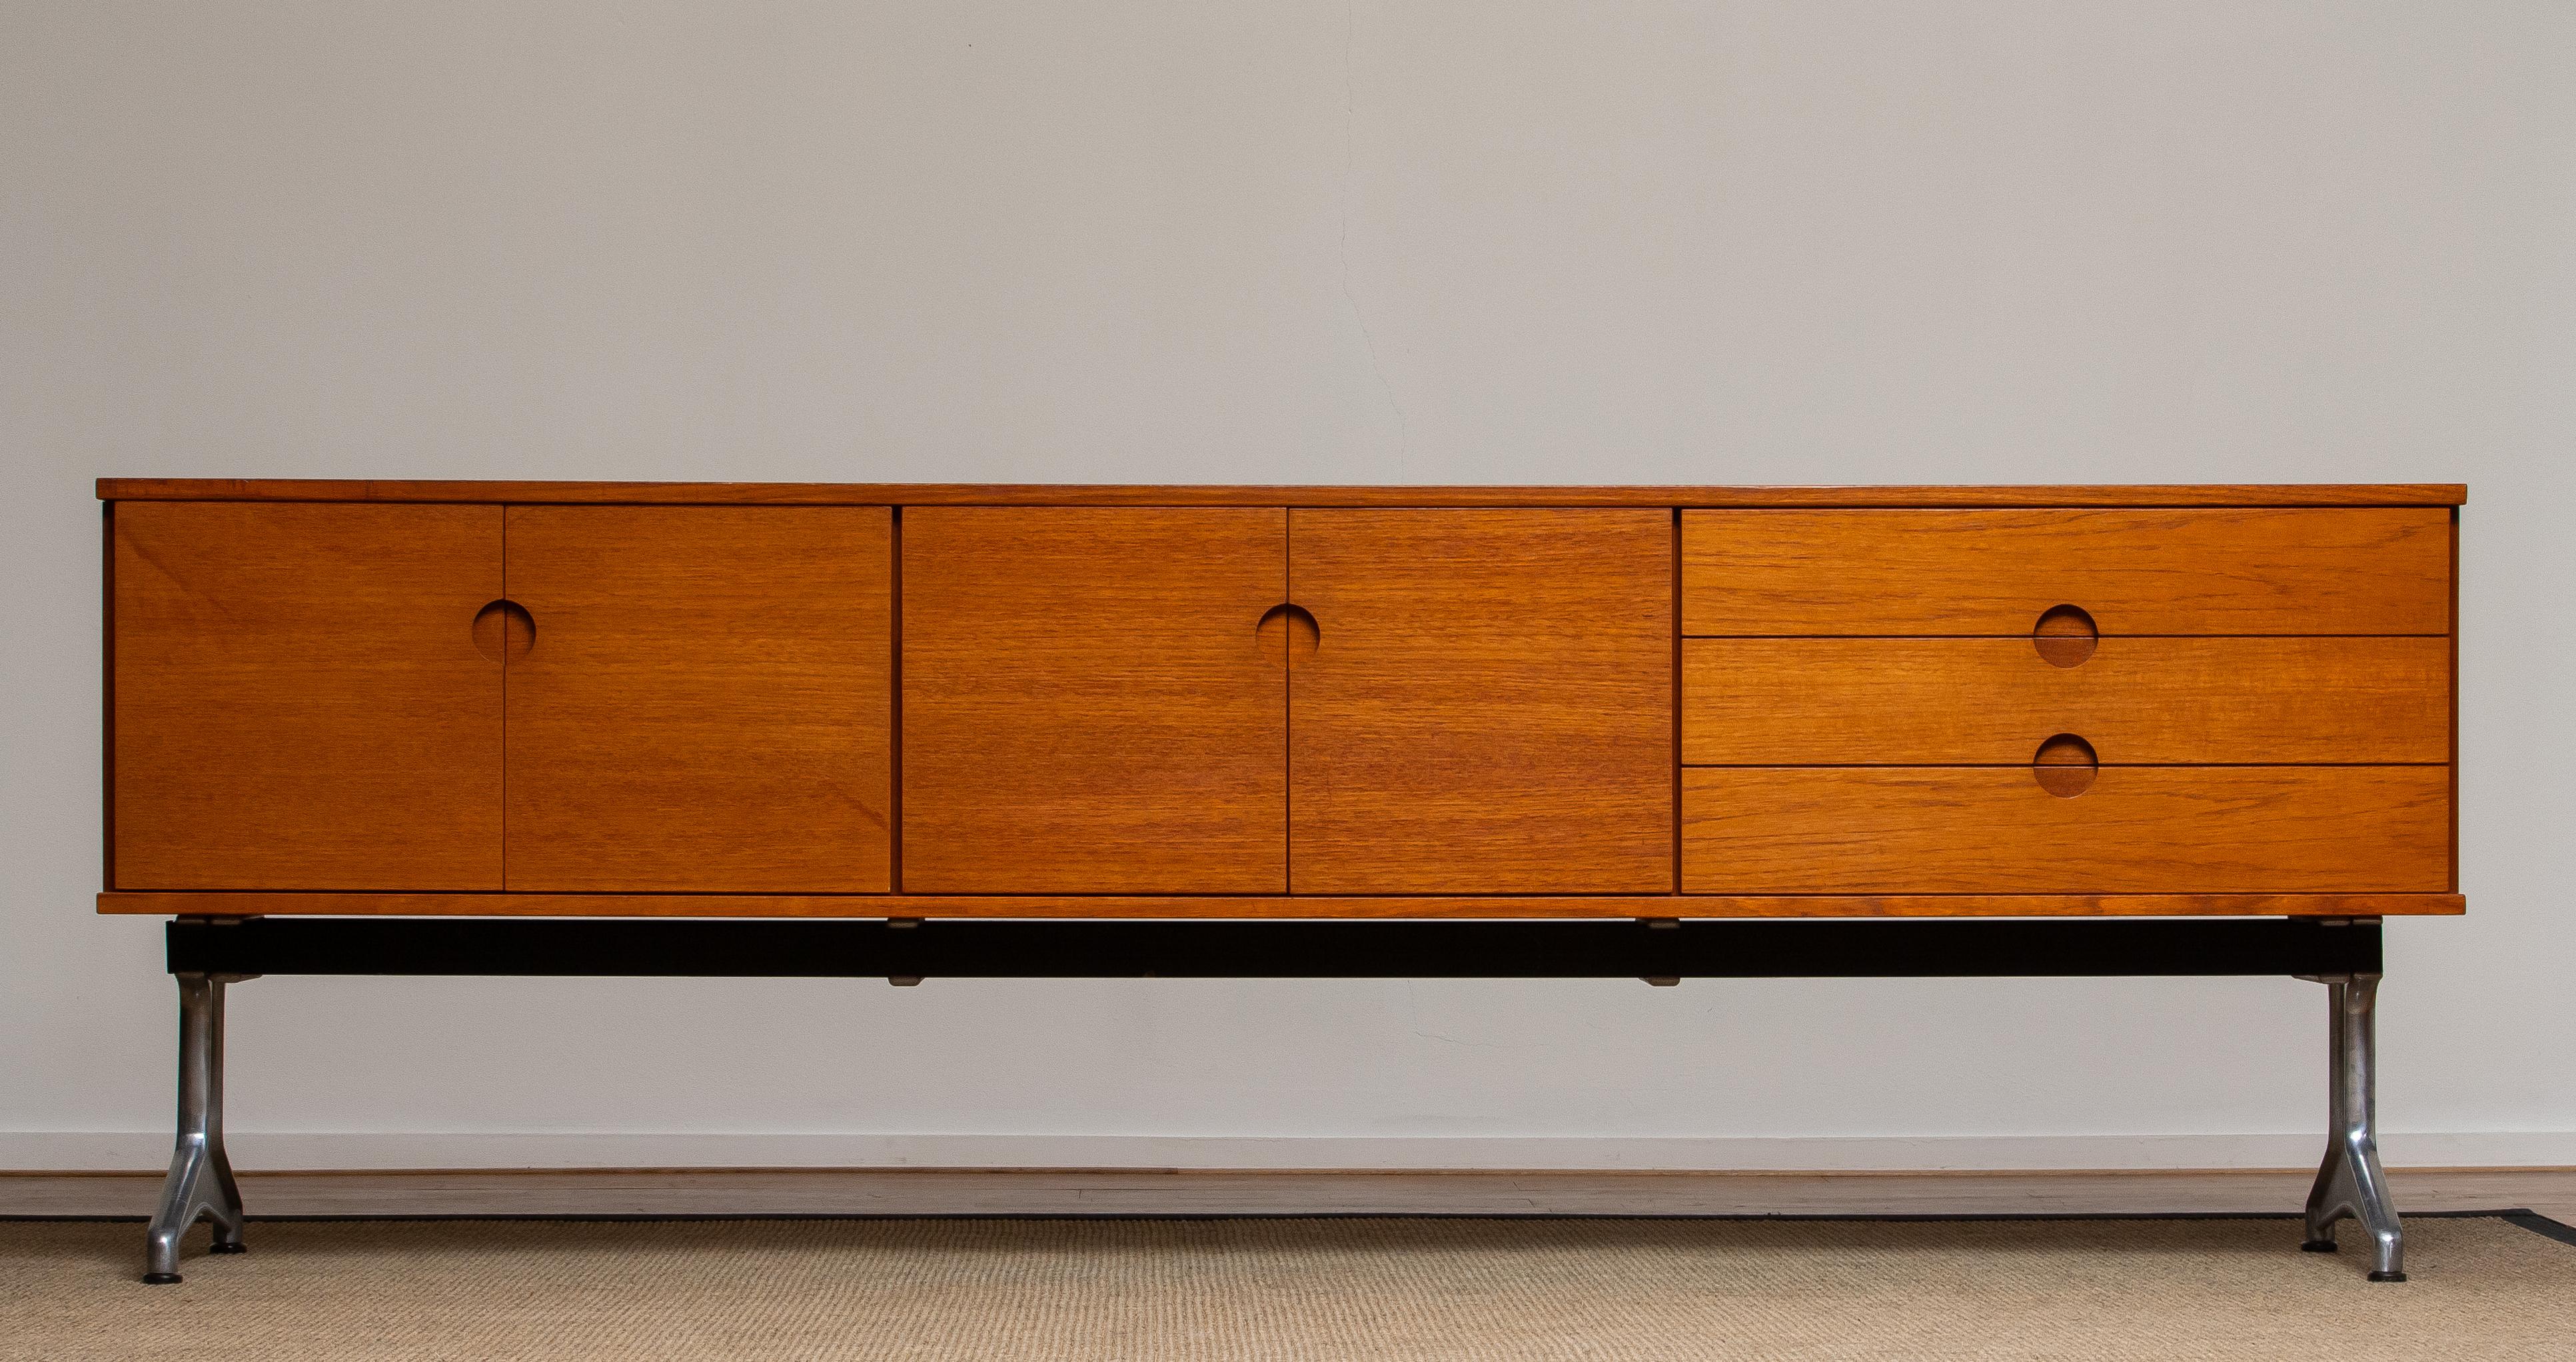 Beautiful Norwegian sideboard / credenzas designed in the 1960s by Pertti Salmi for Vilka Oy in Nastola Soumi, Norway. Consists three drawers and four doors. In both internal cabinets is a removable shelf.
Very nice detail are the milled handles in